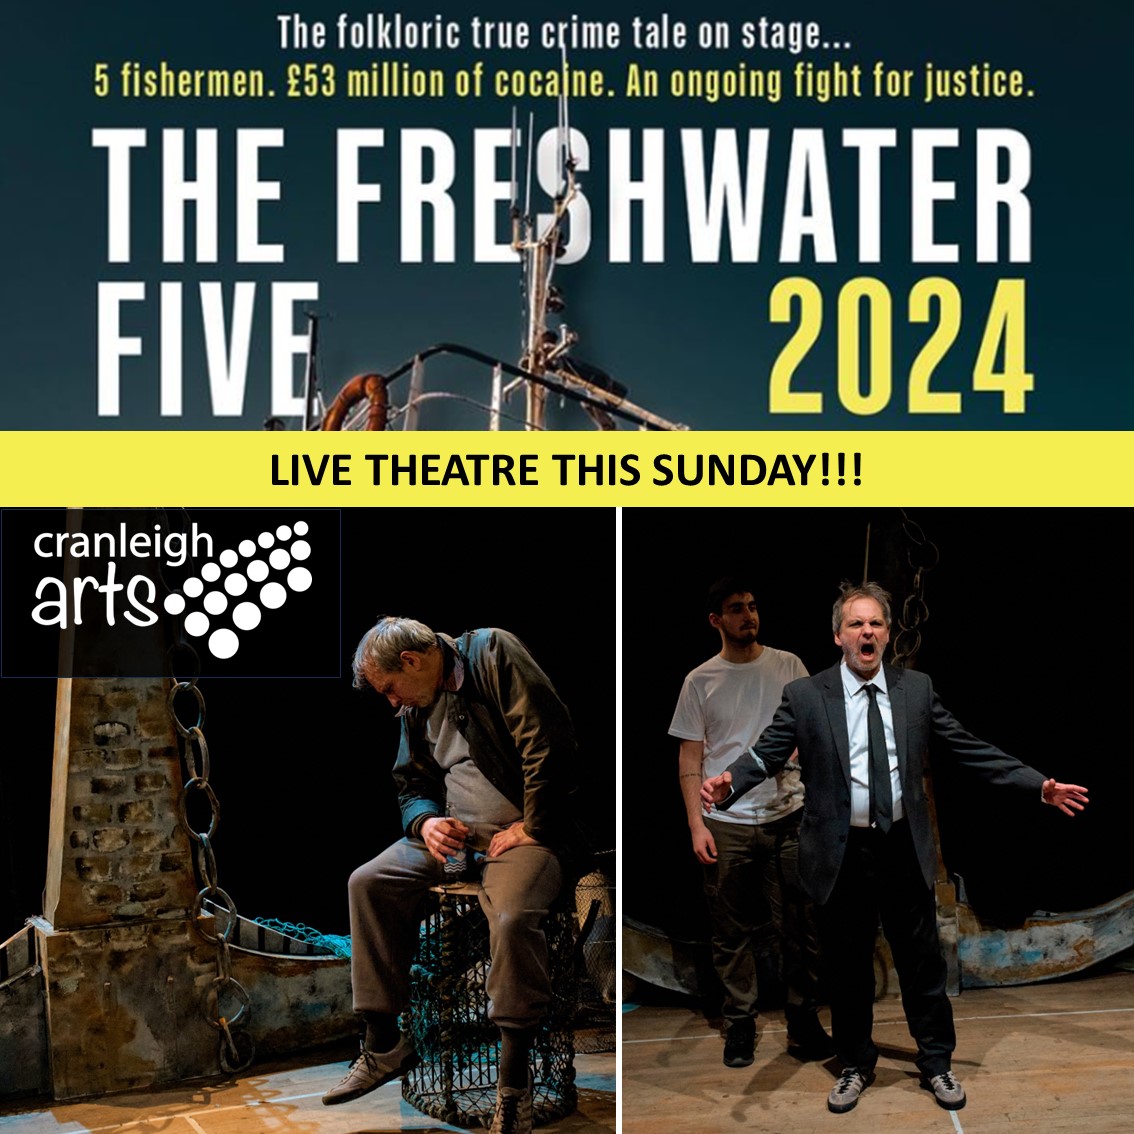 Coming up this Sunday! Live theatre in your village! Join us on Sun 12 May at 7.30pm for an incredible story of five fishermen on the Isle of Wight who were sentenced in 2011 but have always professed their innocence cranleigharts.org/event/the-fres… #FreshwaterFive #LiveTheatre #Cranleigh